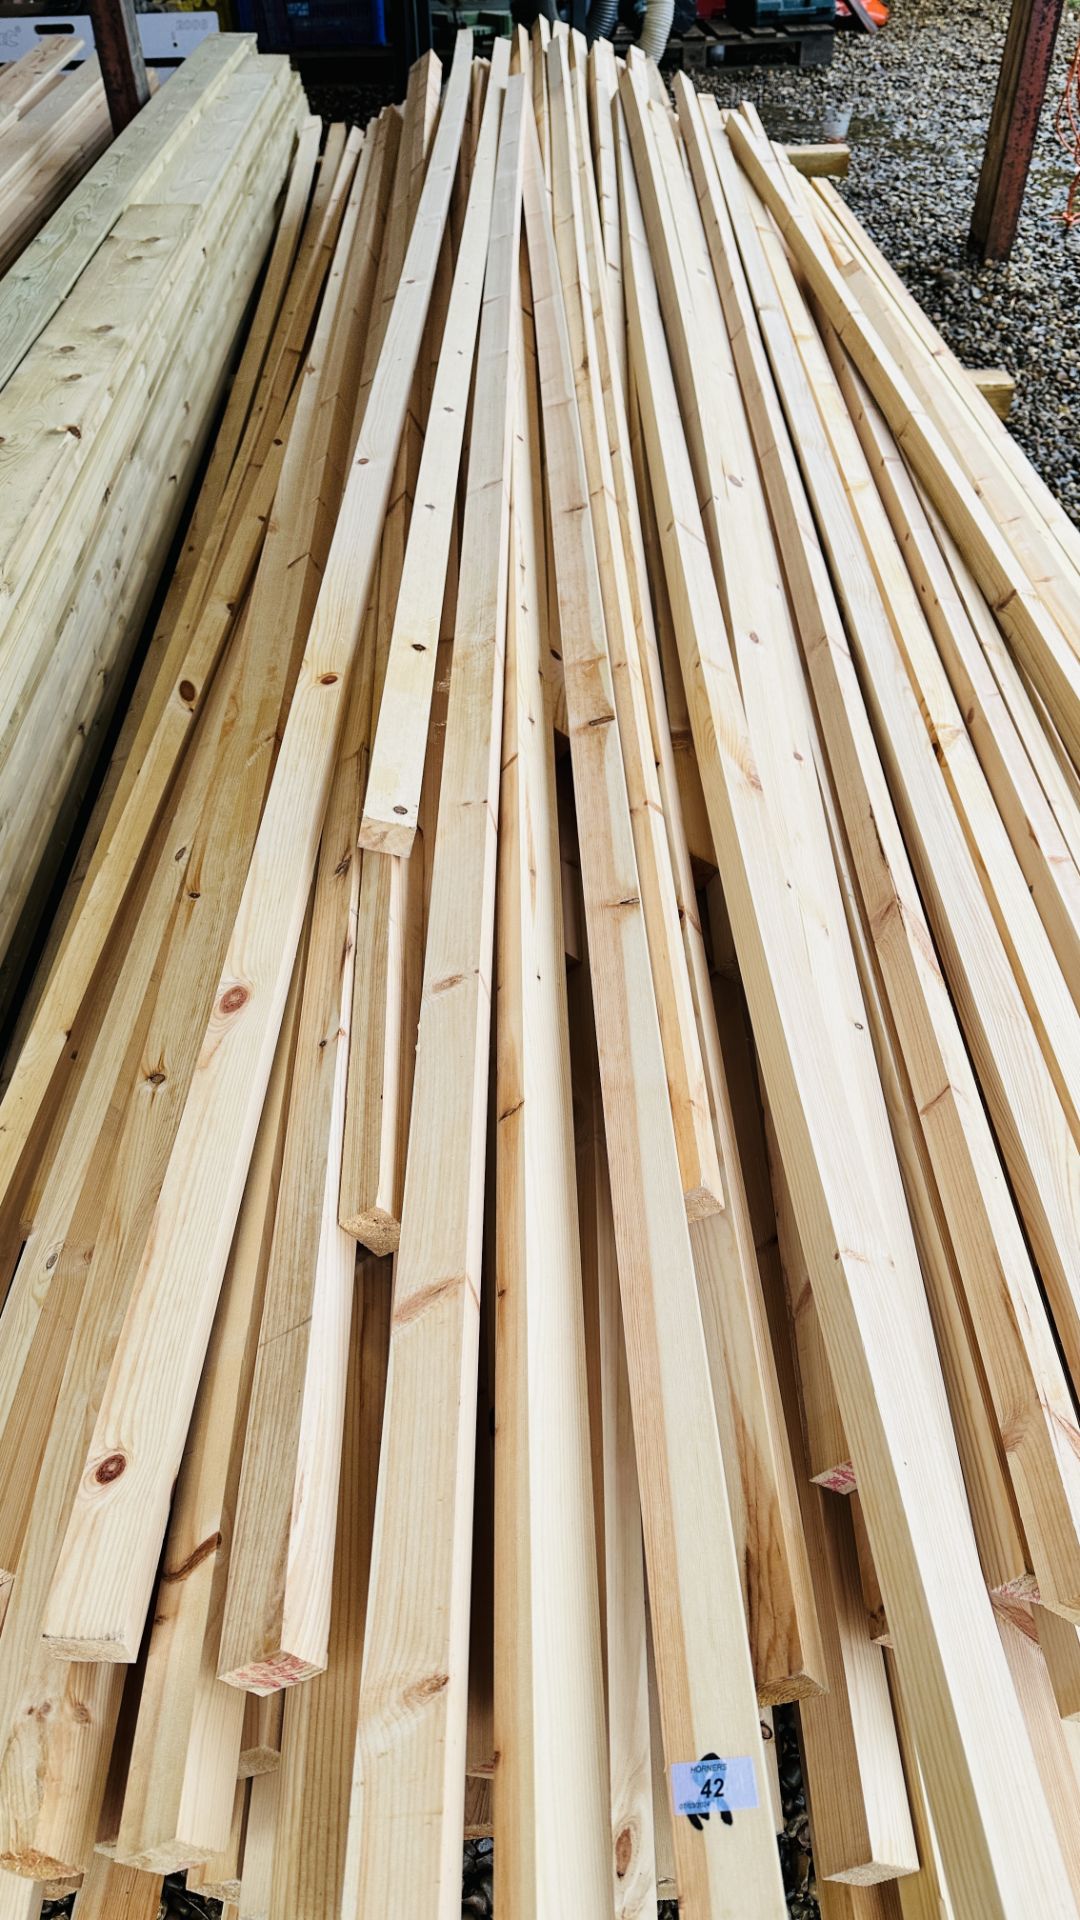 APPROX 150 LENGTHS OF 45MM X 35MM PLANED TIMBER AVERAGE LENGTH 4 METRE. - Image 4 of 5